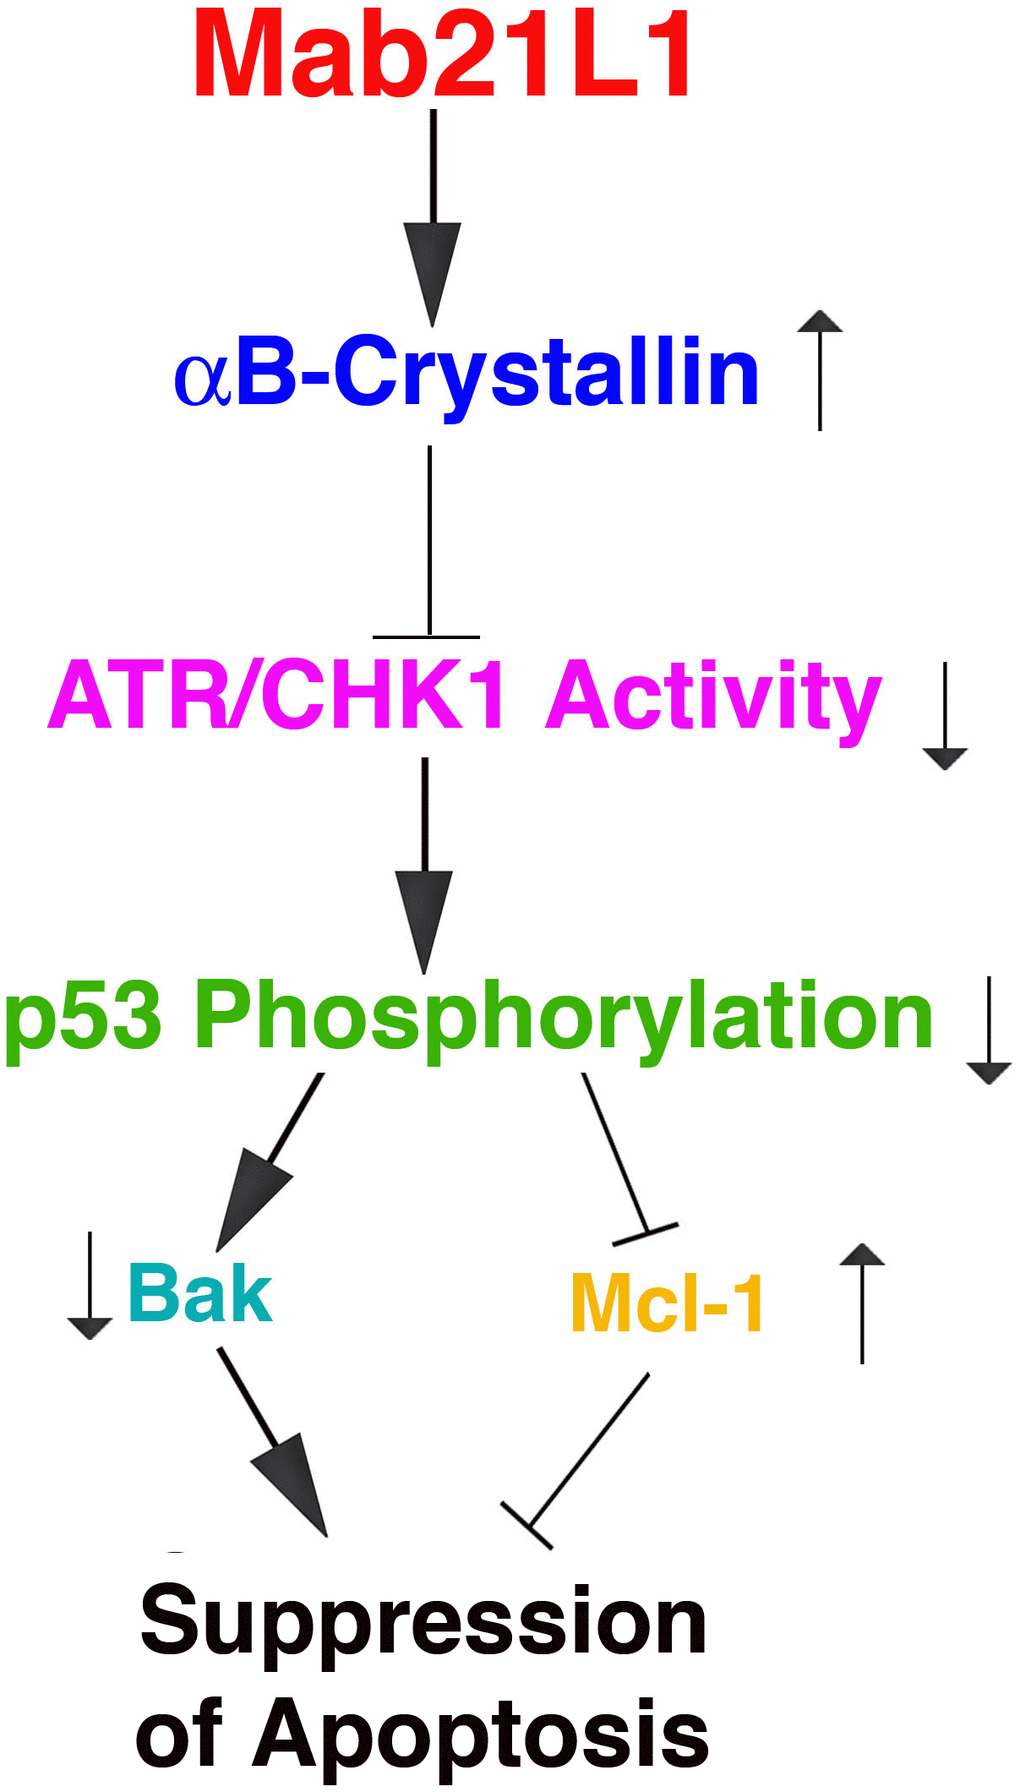 Diagram to show the mechanism mediating Mab21L1 promotion of survival of lens epithelial cells. Mab21L1 promotes survival of lens epithelial cells through upregulation of αB-crystallin to suppress the ATR/CHK1/p53 pathway and thus downregulate Bak expression but enhance Mcl-1 expression. As a result, MAB21L1 can suppress stress (okadaic acid or UVA)-induced apoptosis.